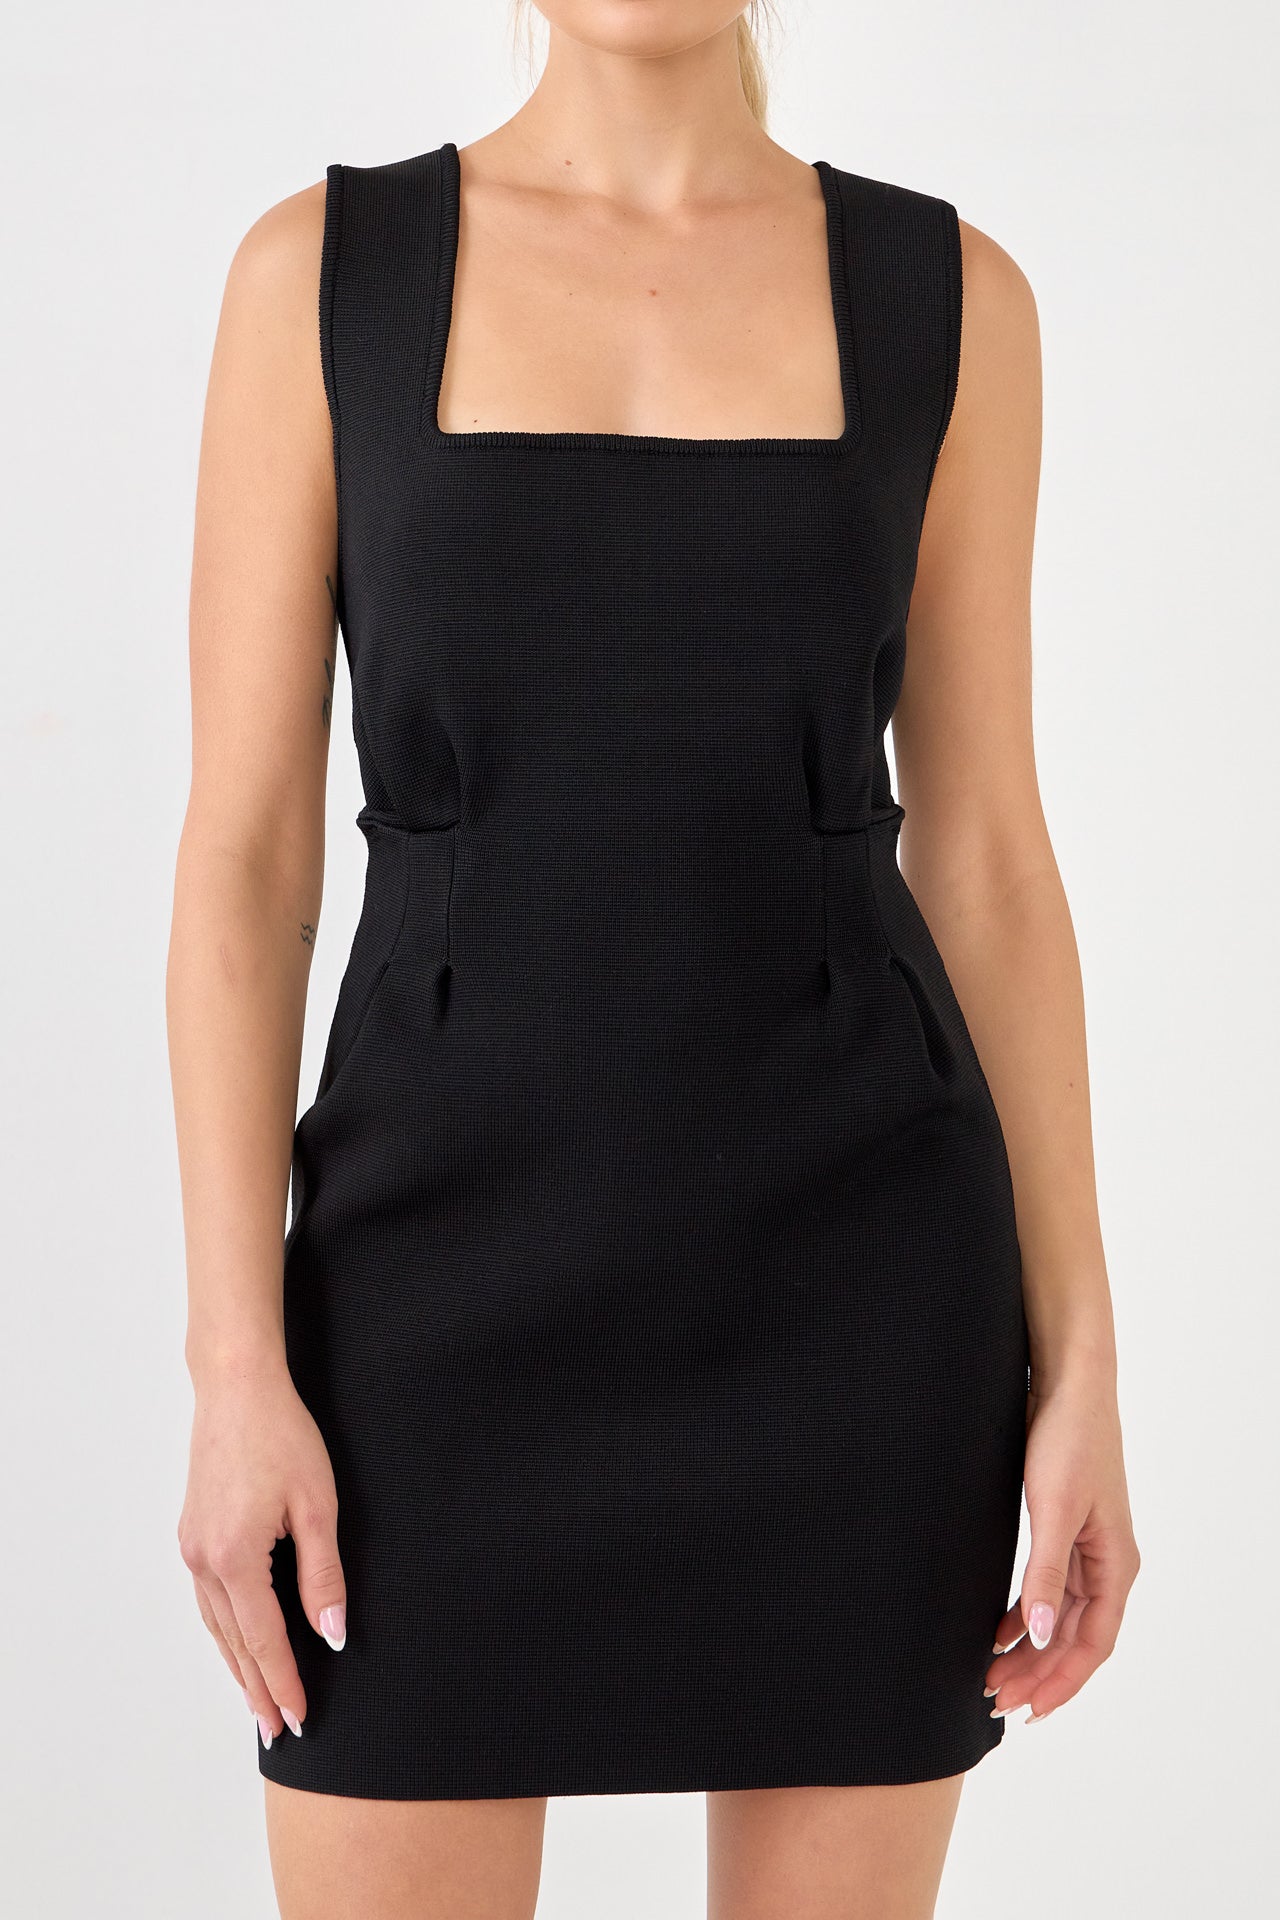 ENDLESS ROSE - Bodycon Knit Dress with Square Neckline - DRESSES available at Objectrare